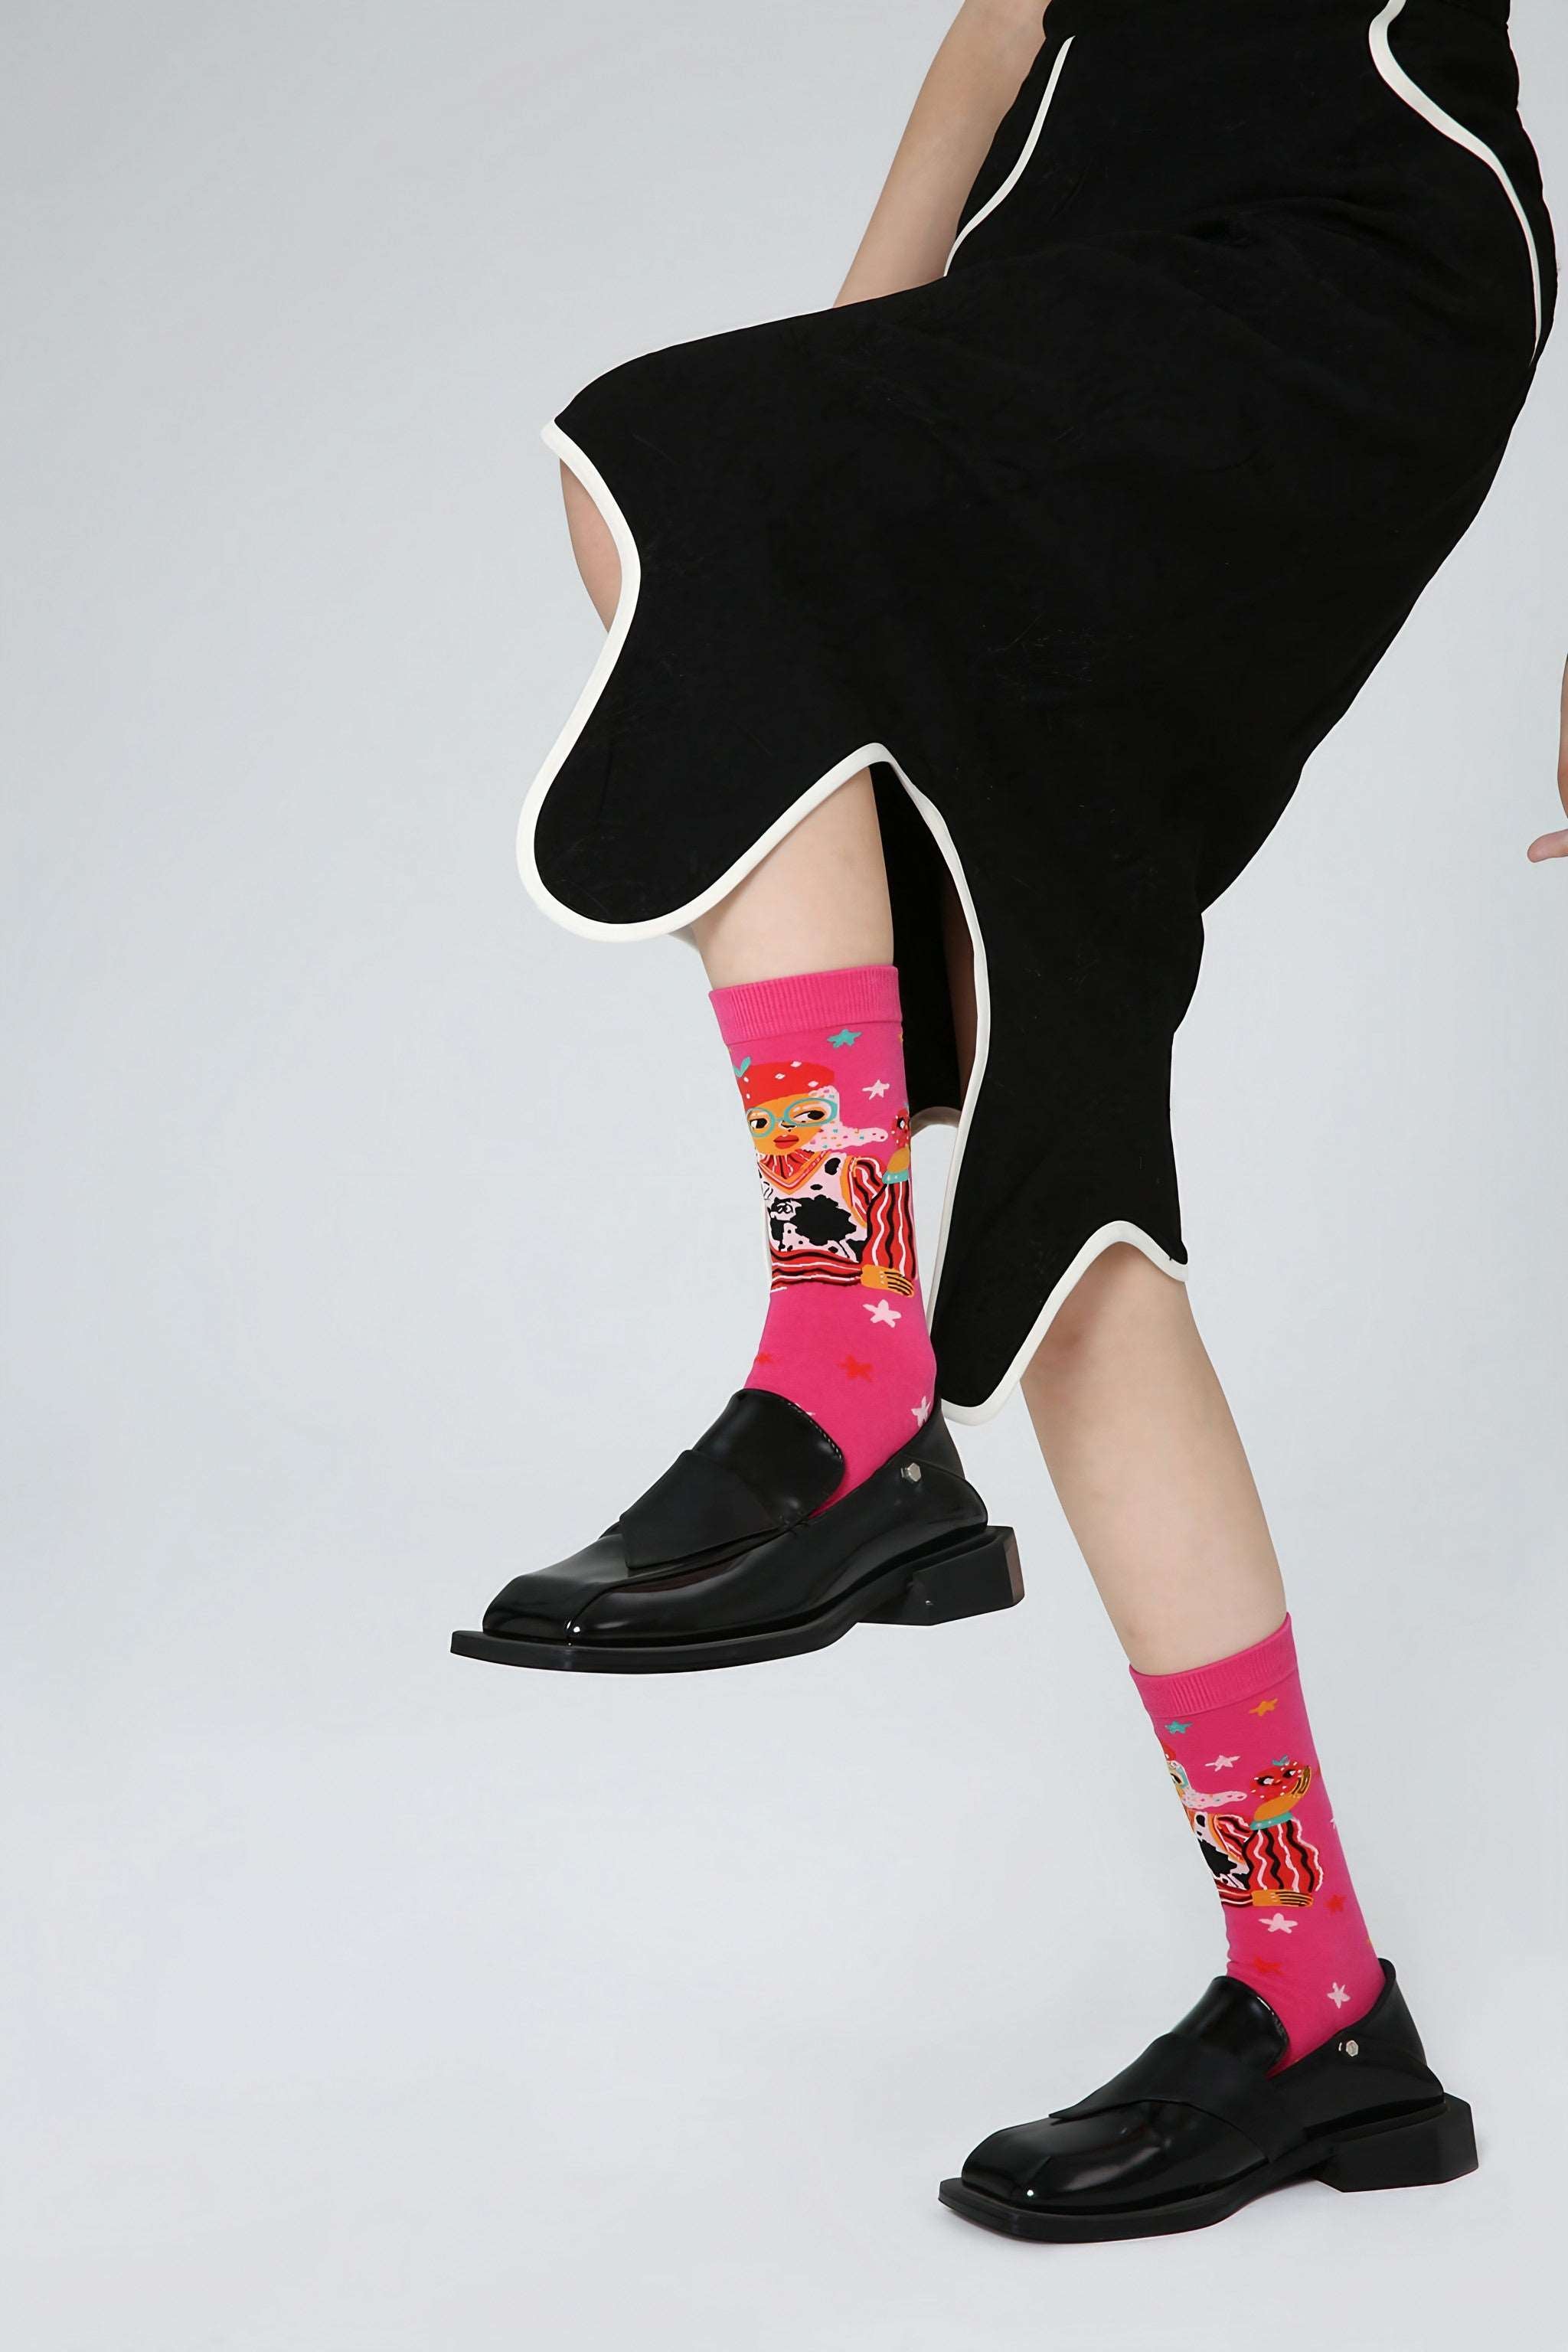 A pair of Blackpink themed socks with funky patterns for women